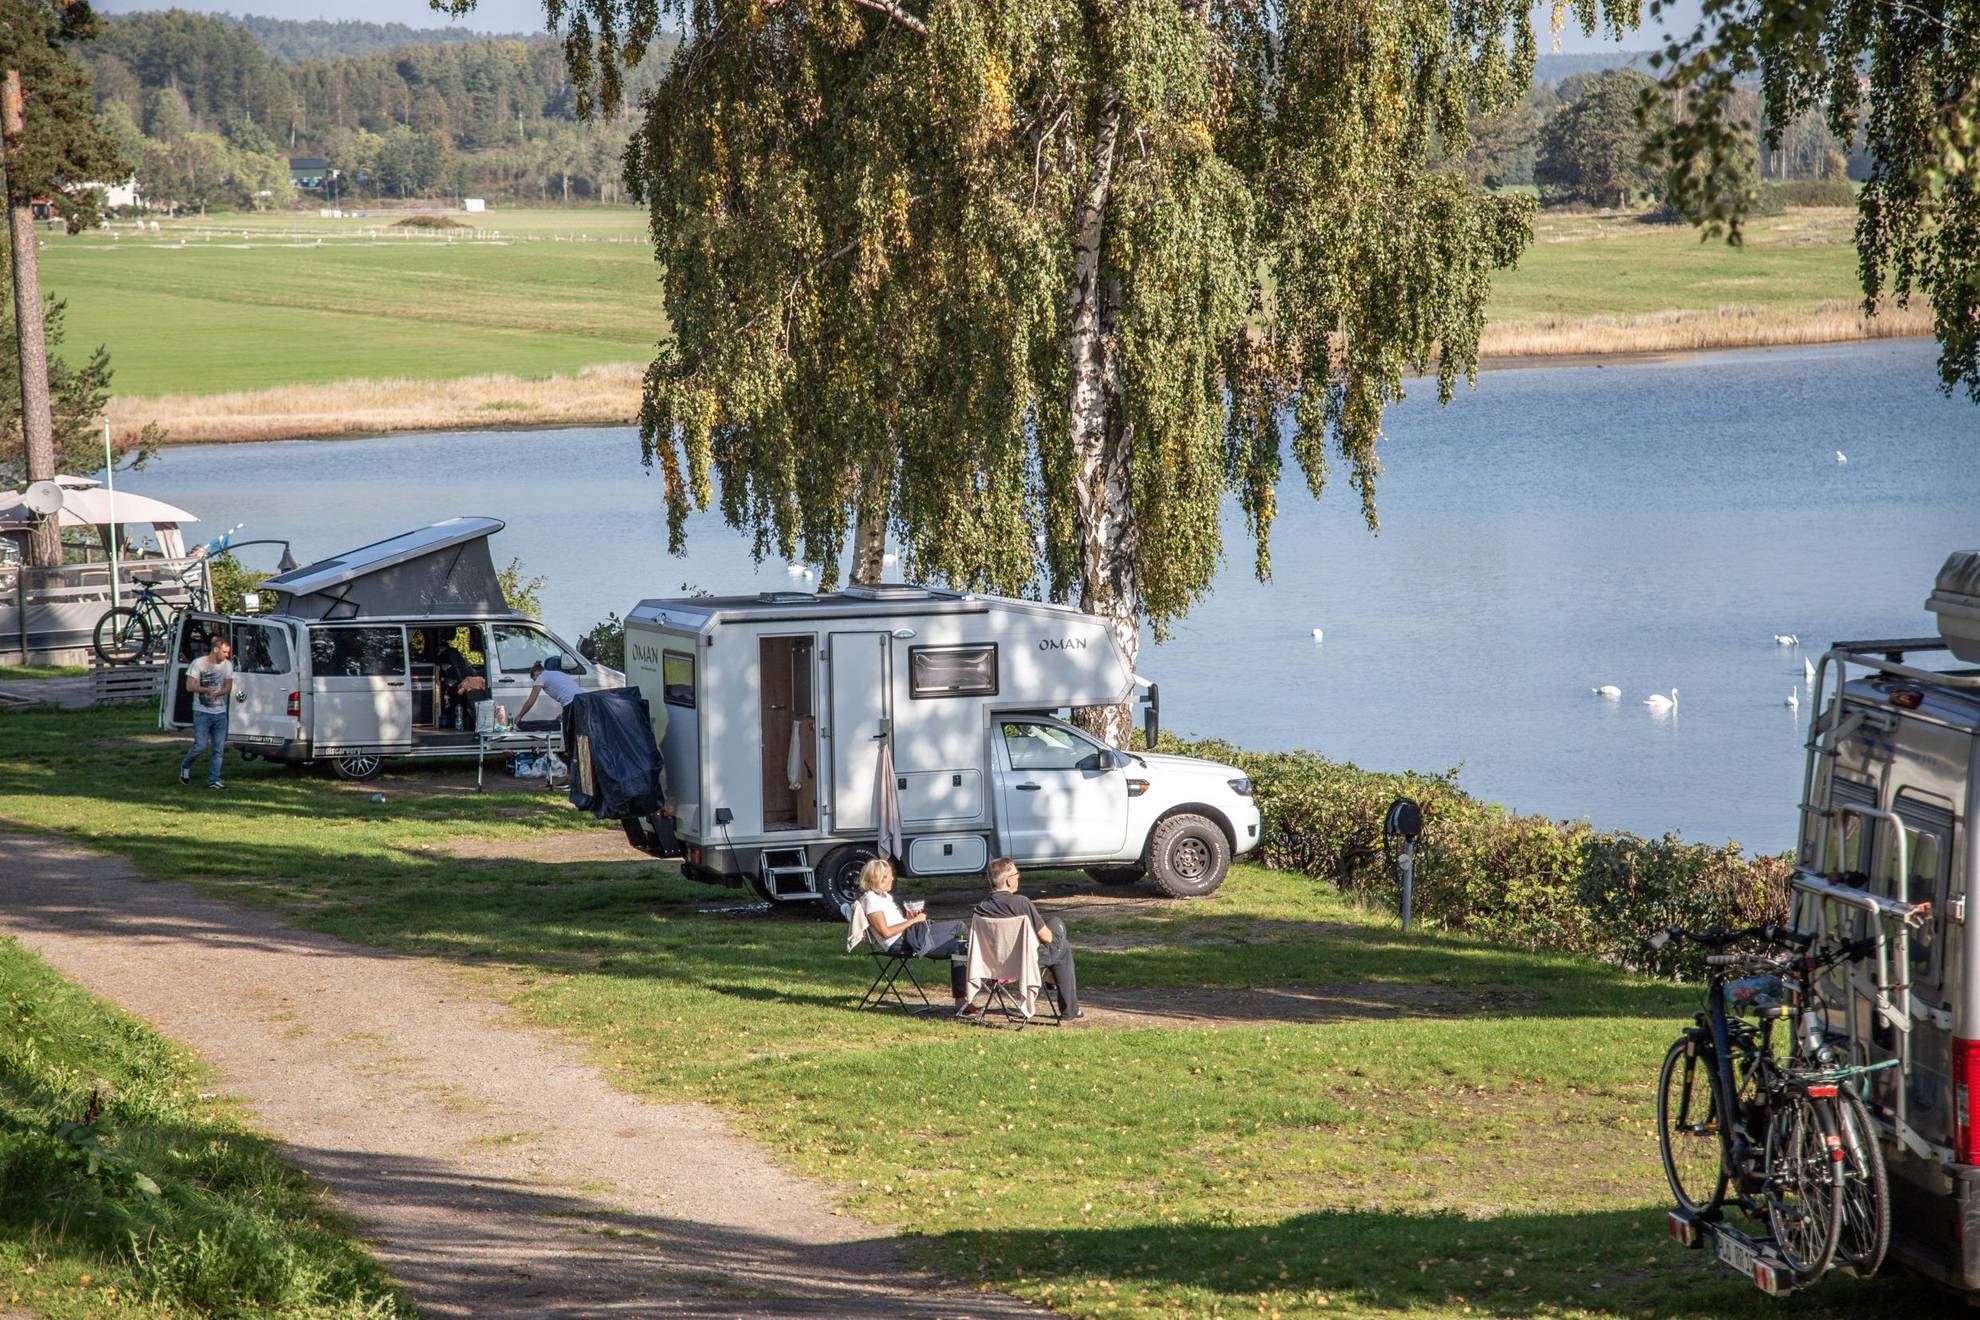 Two people are sitting in chairs outside their camper next to a lake.